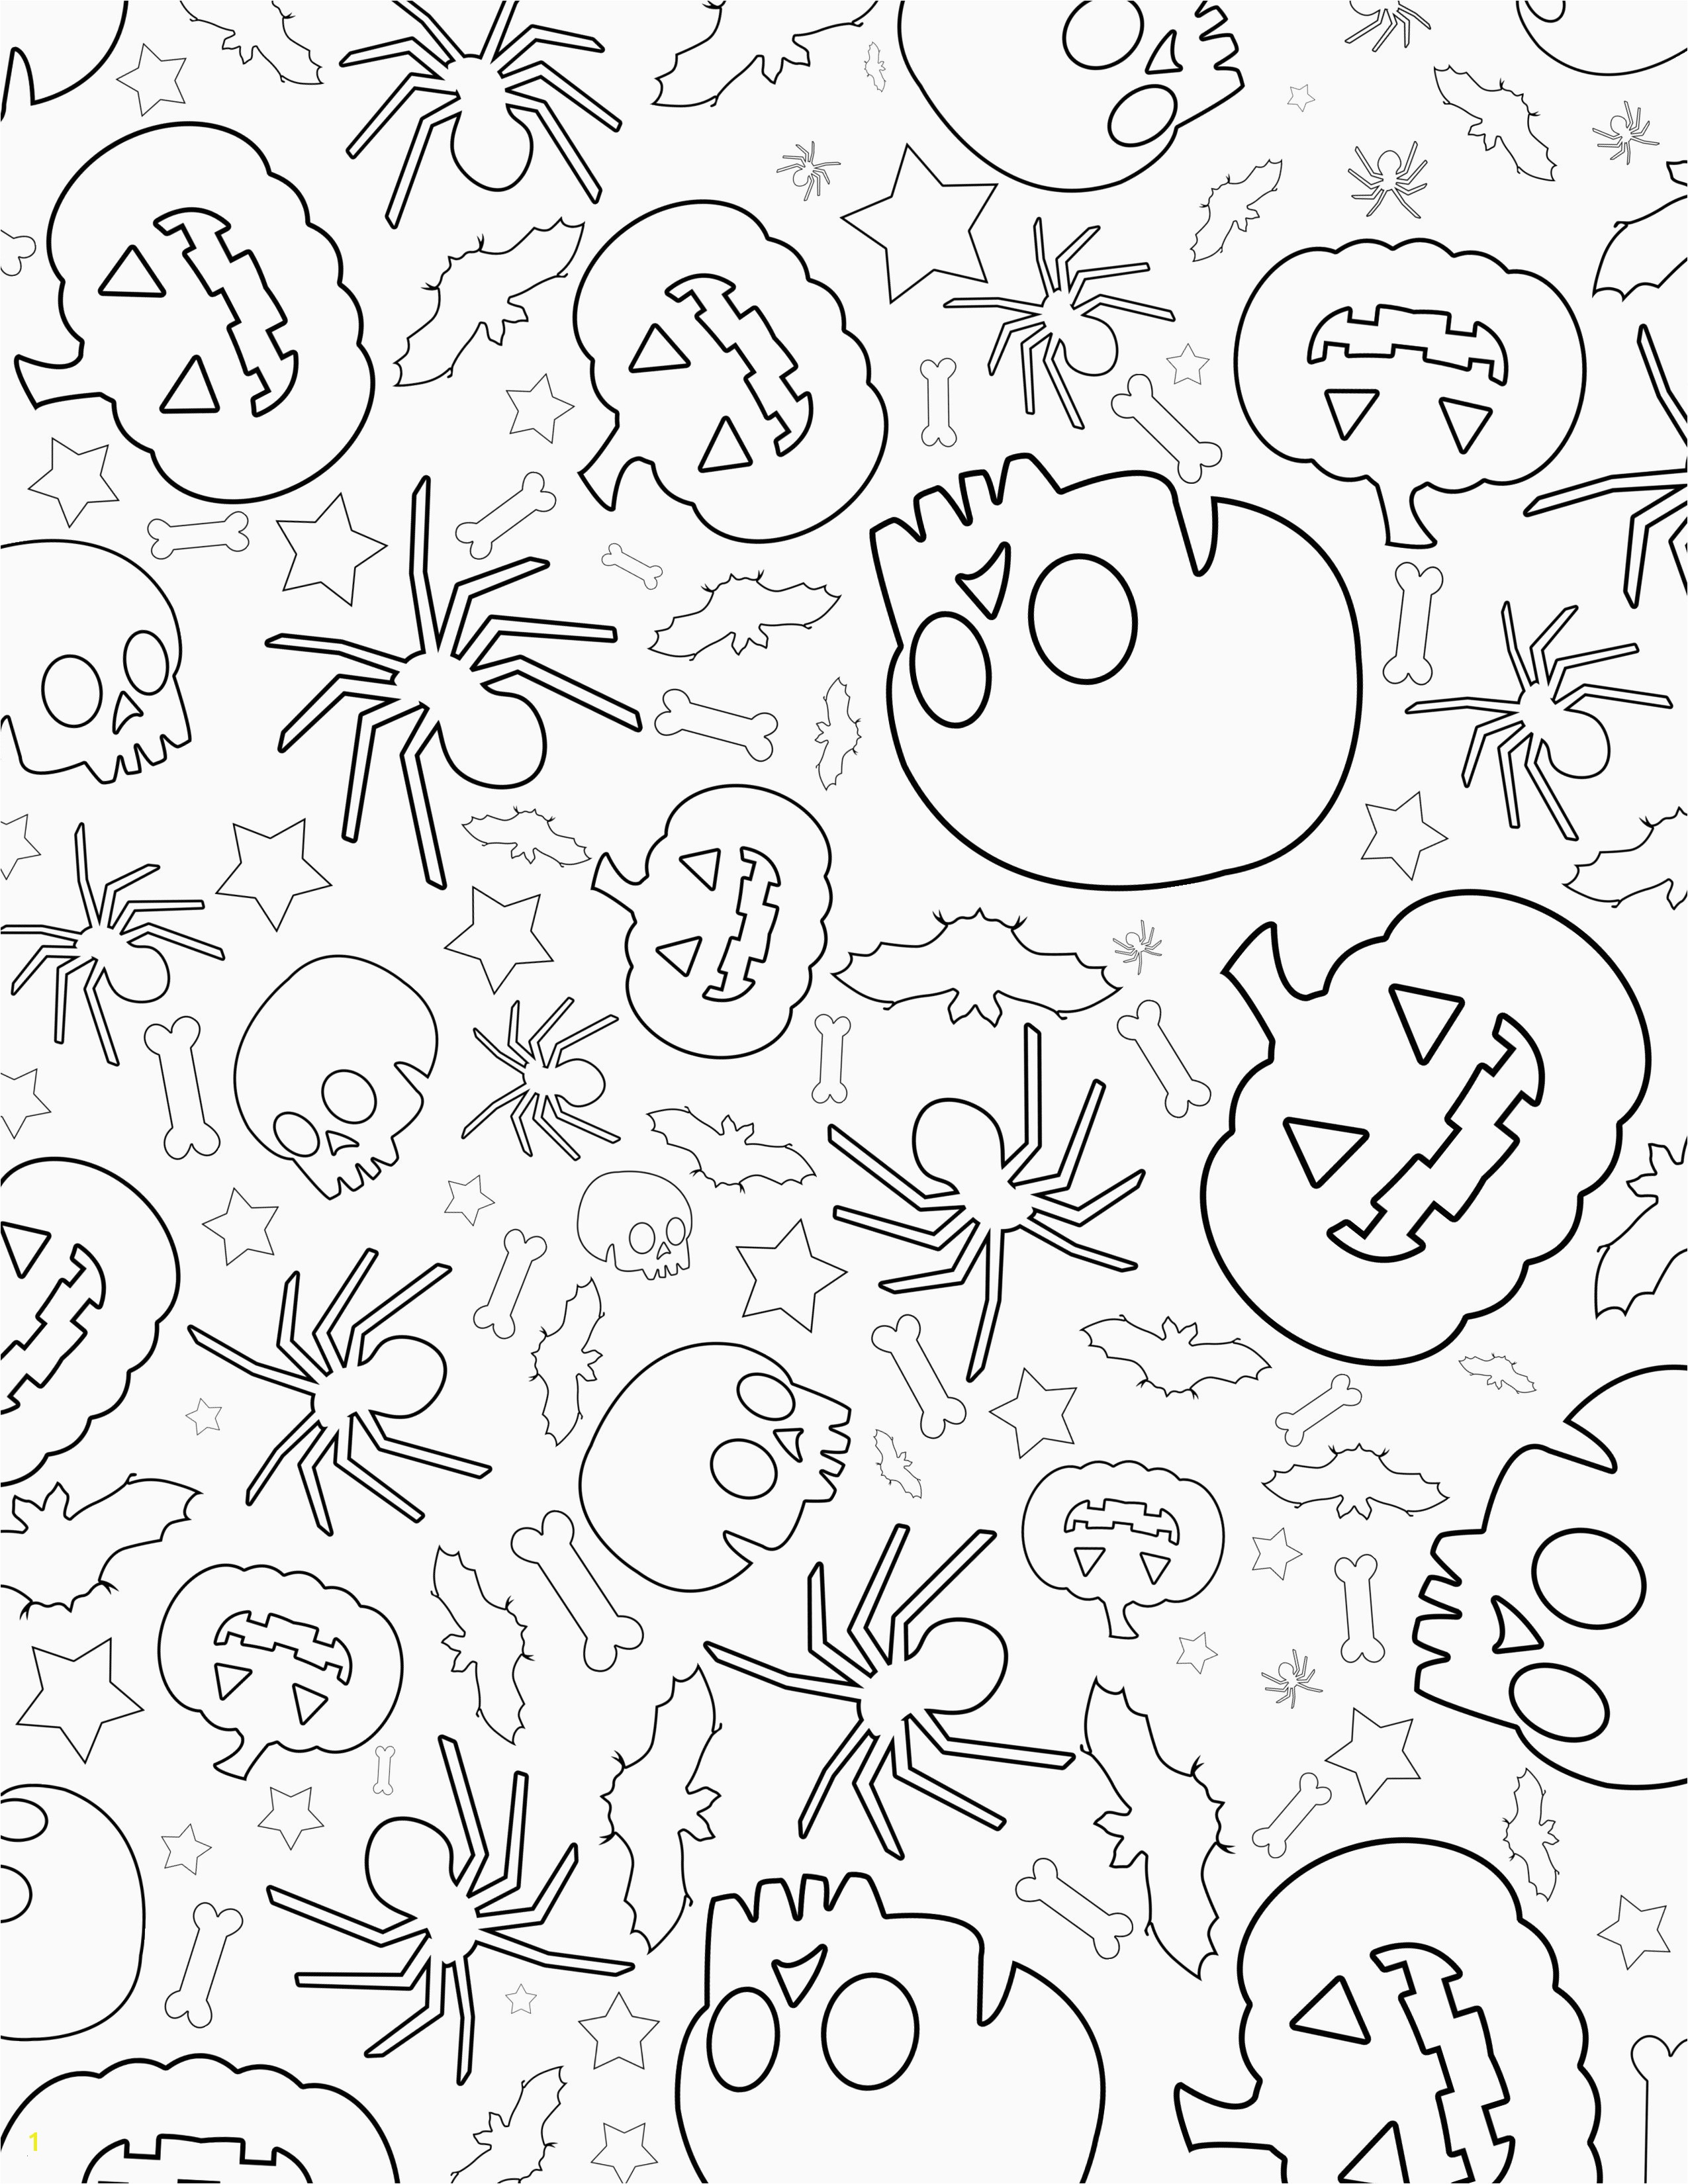 Idiom Coloring Pages 34 Unique Fall Coloring Pages for Kindergarten Cloud9vegas